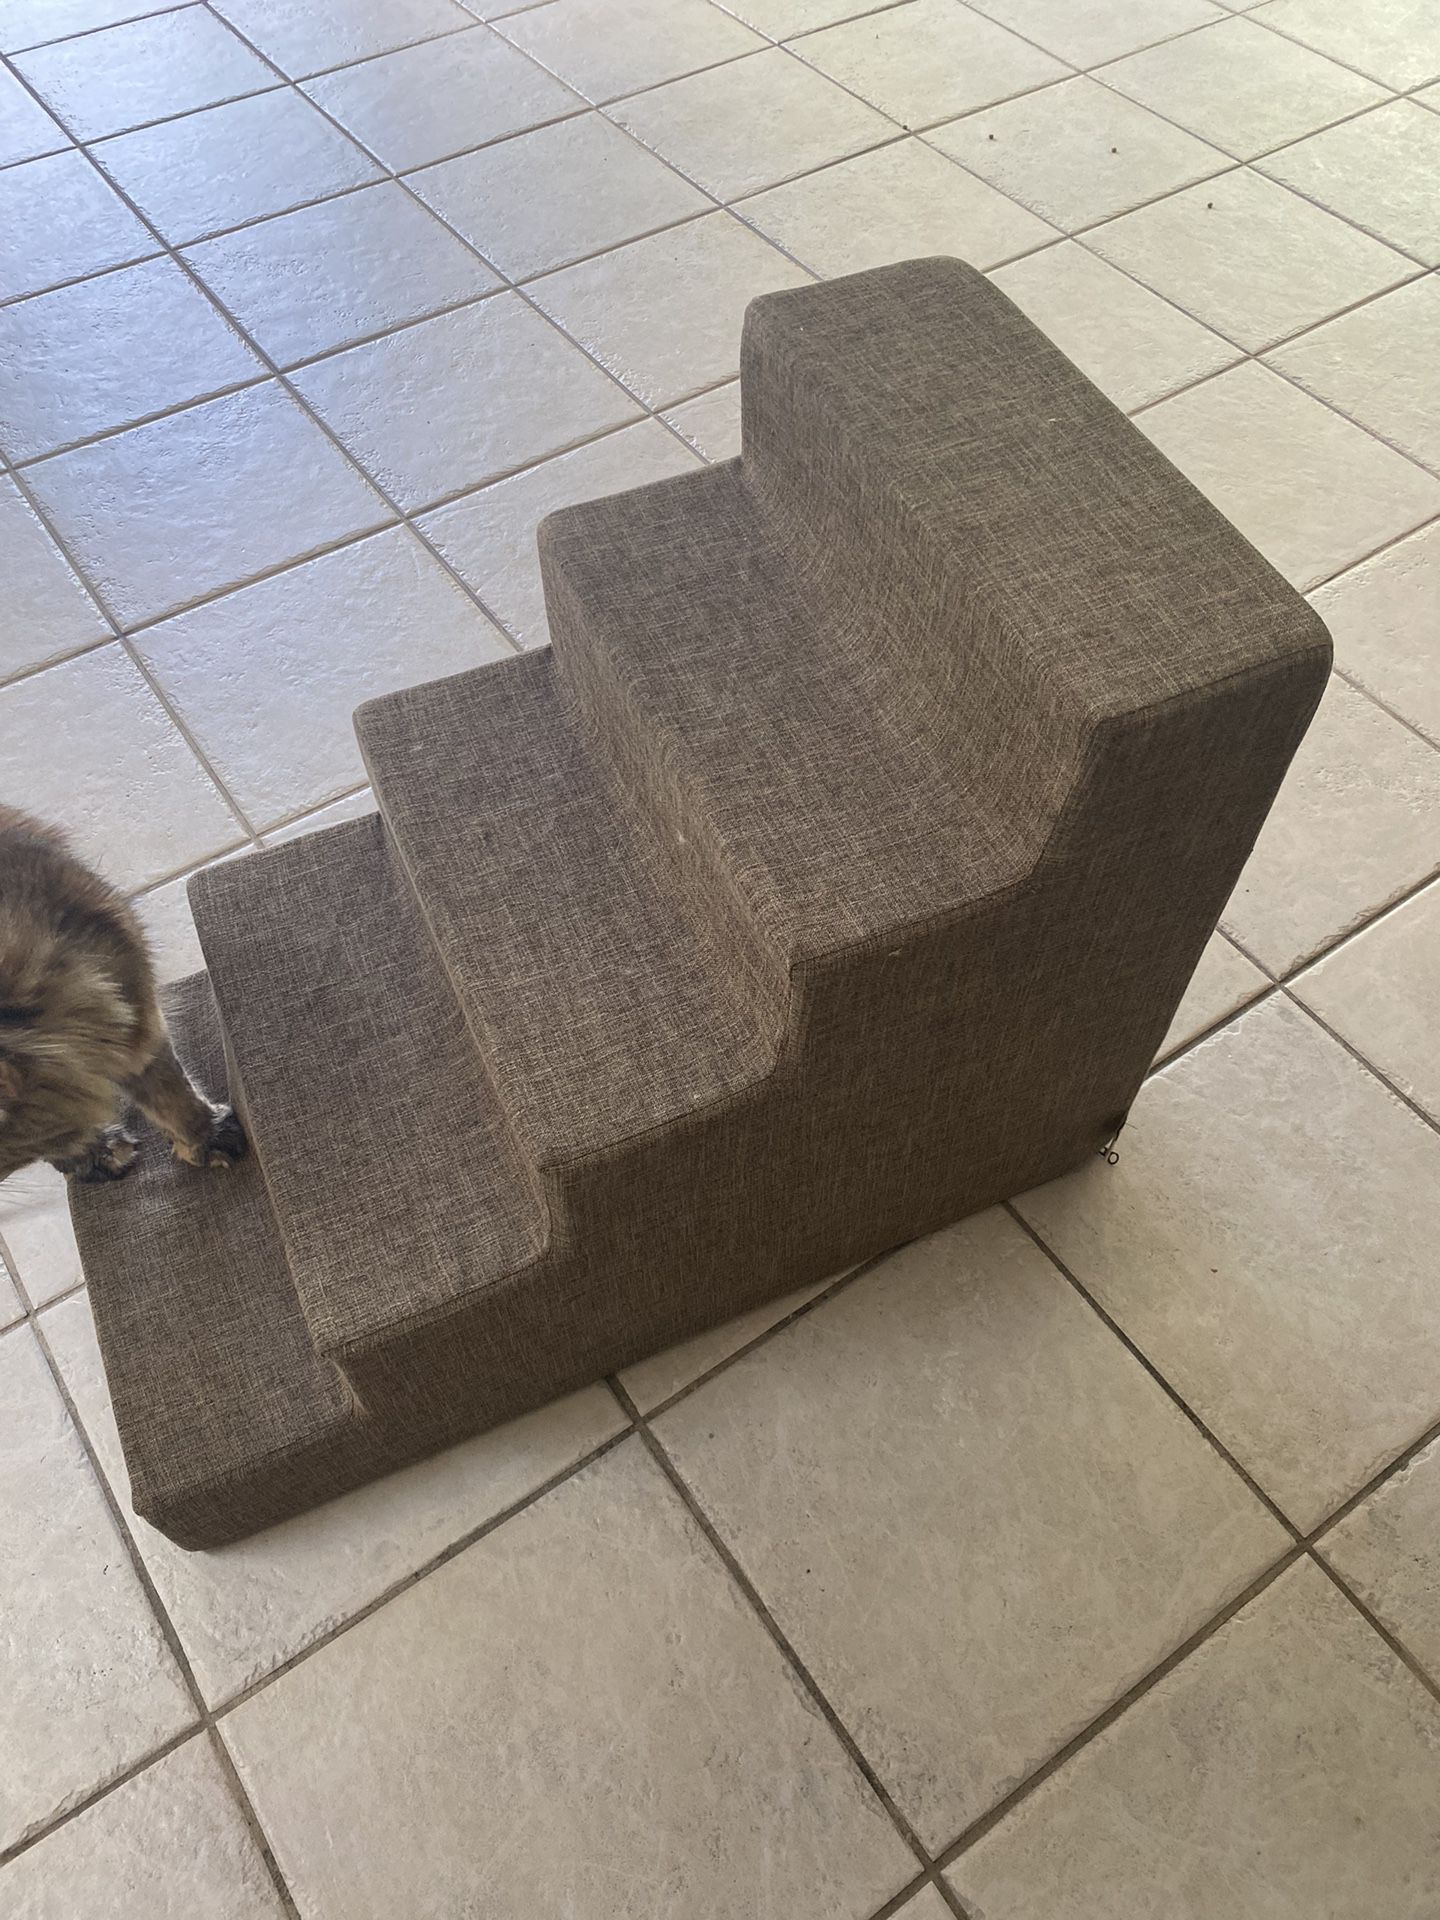 5 Step Doggy Stairs $25